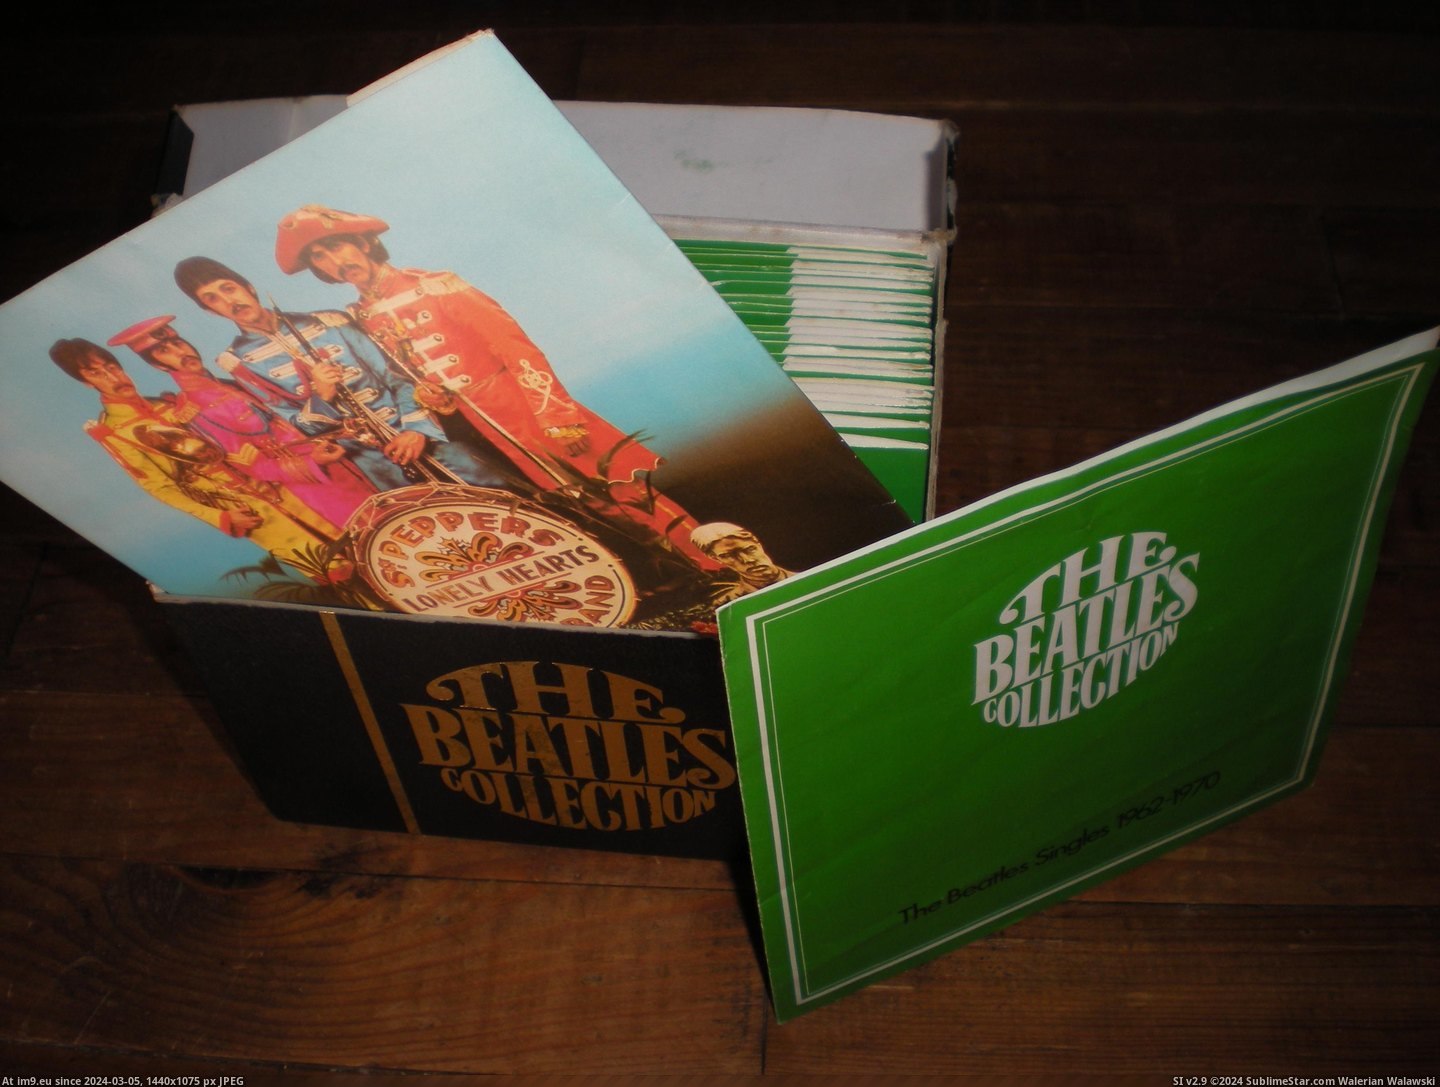 #Collection #Beatles #Box Beatles Collection Box 2 Pic. (Image of album new 1))